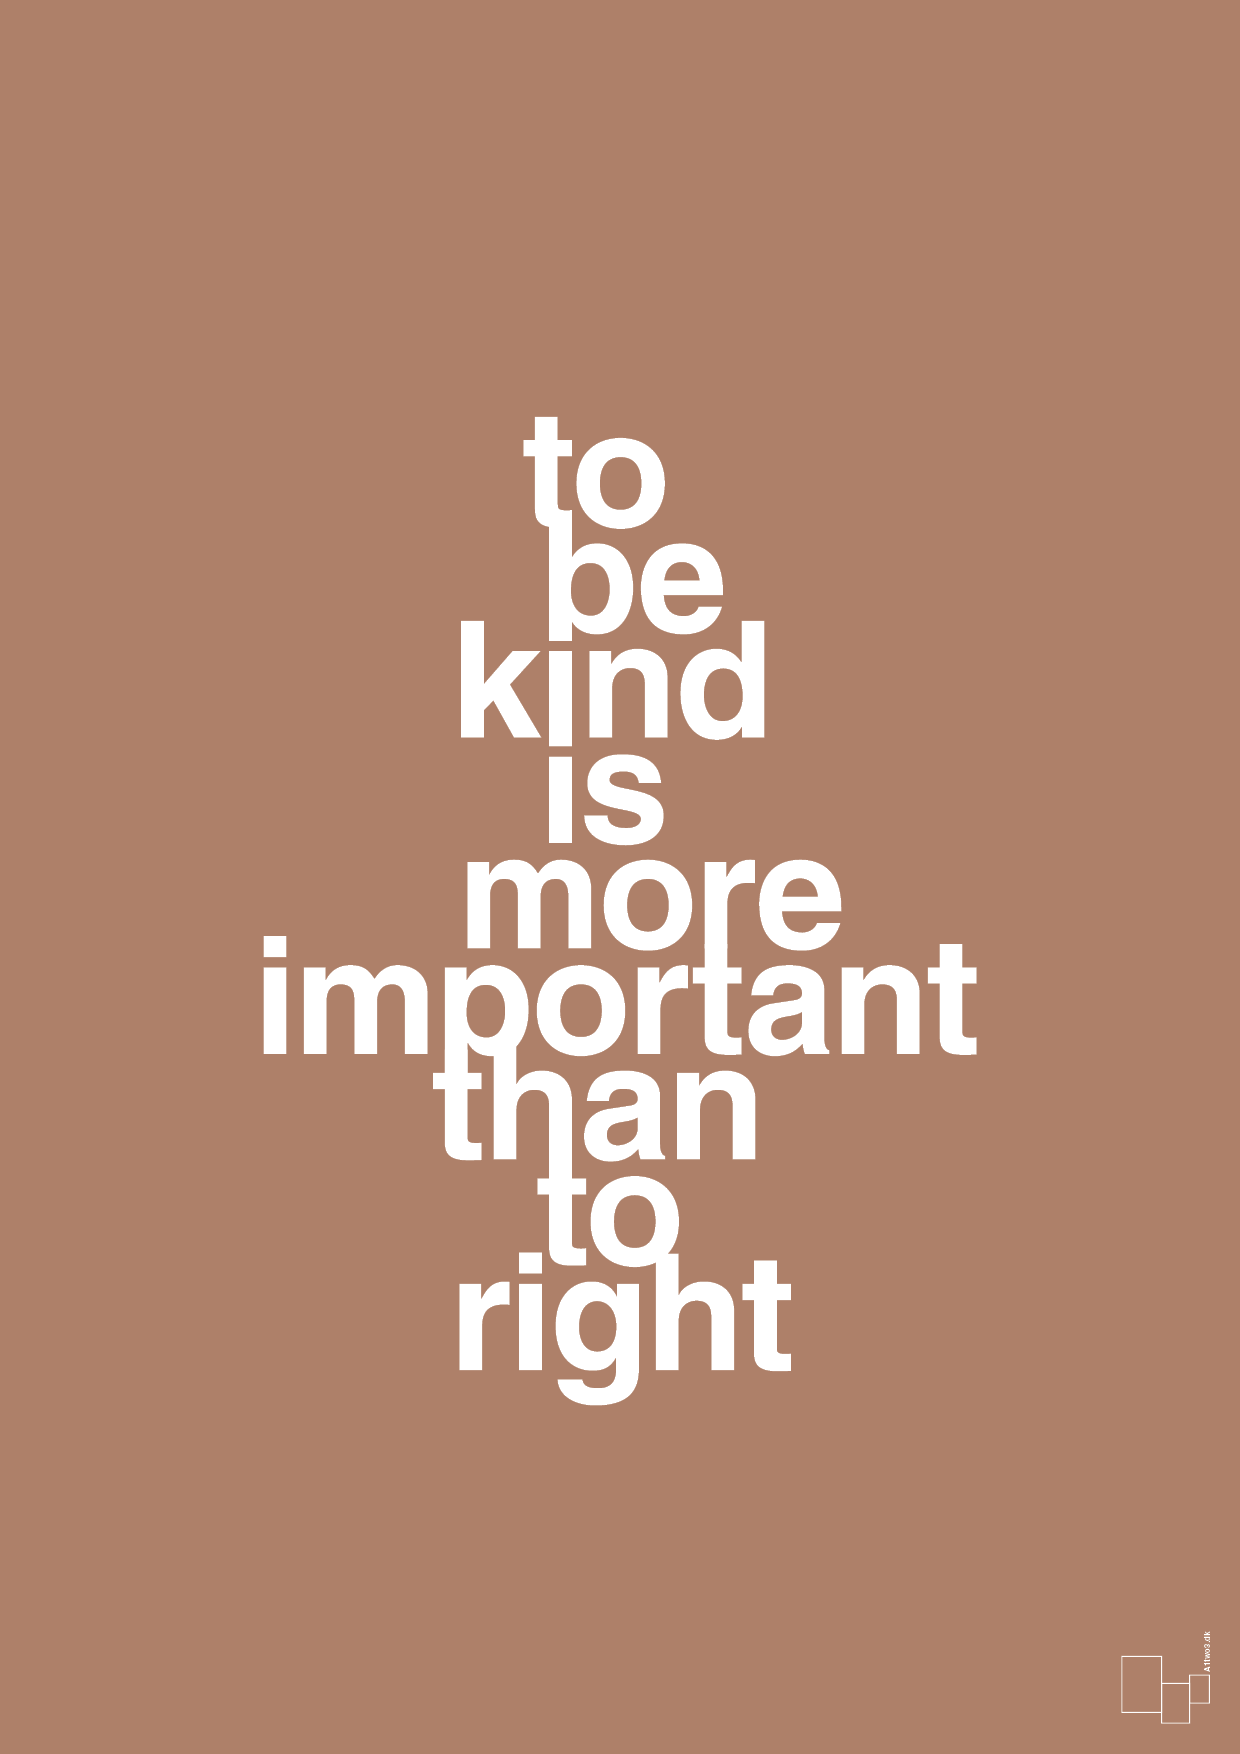 plakat: to be kind is more important than to right